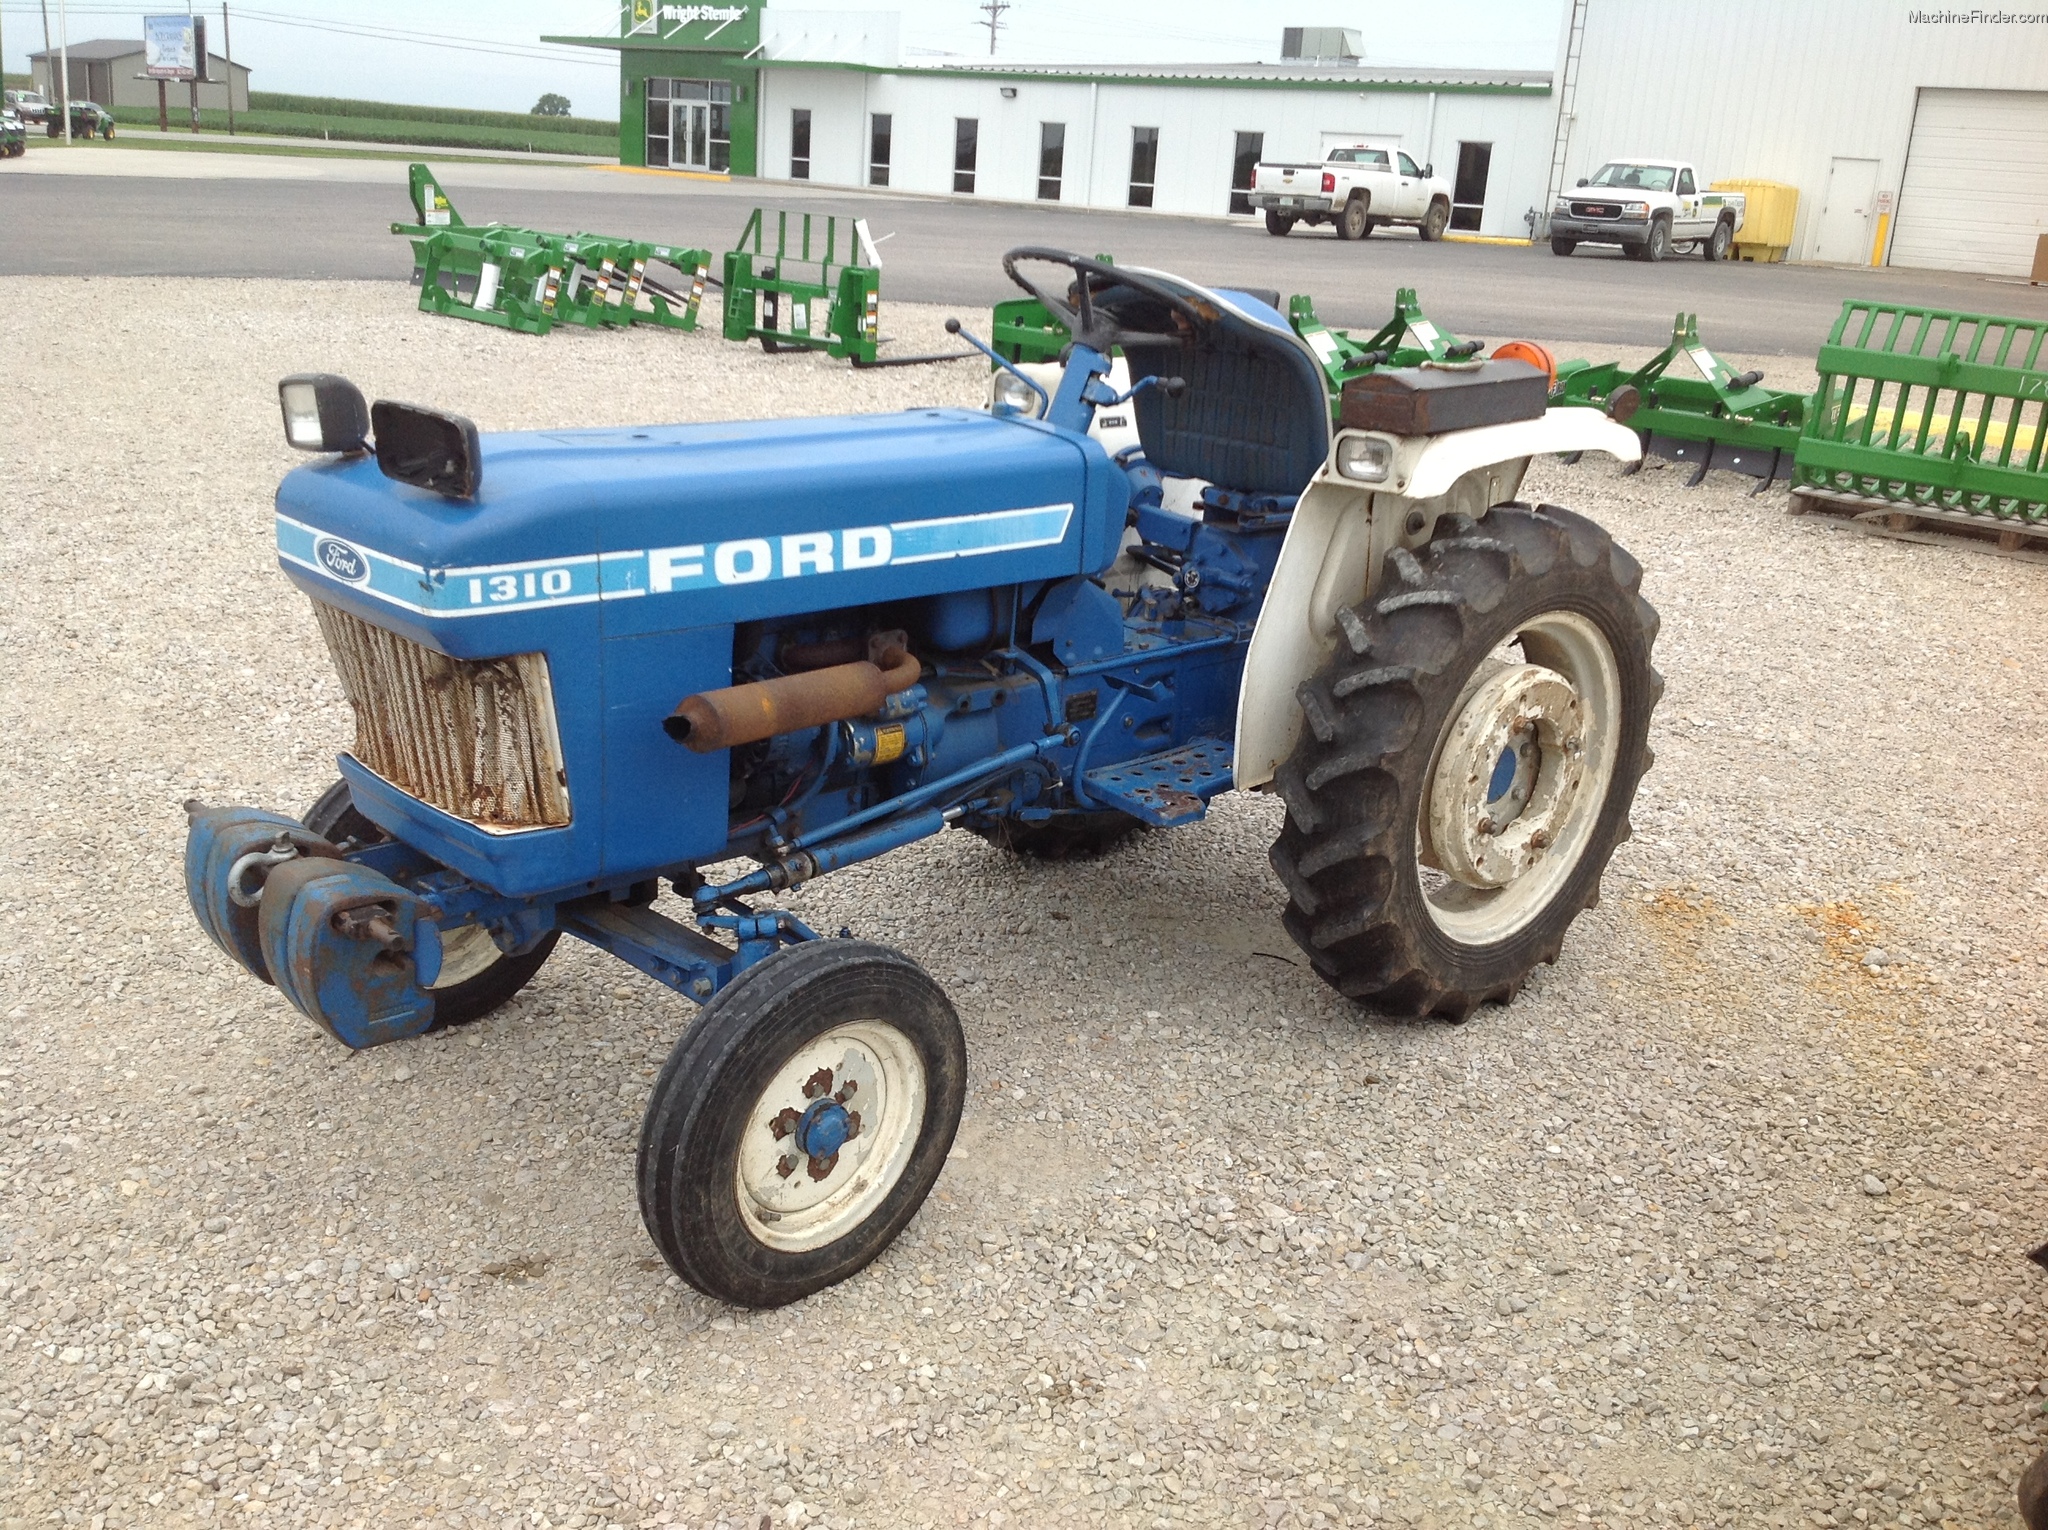 1984 Ford tractor 1310 #4